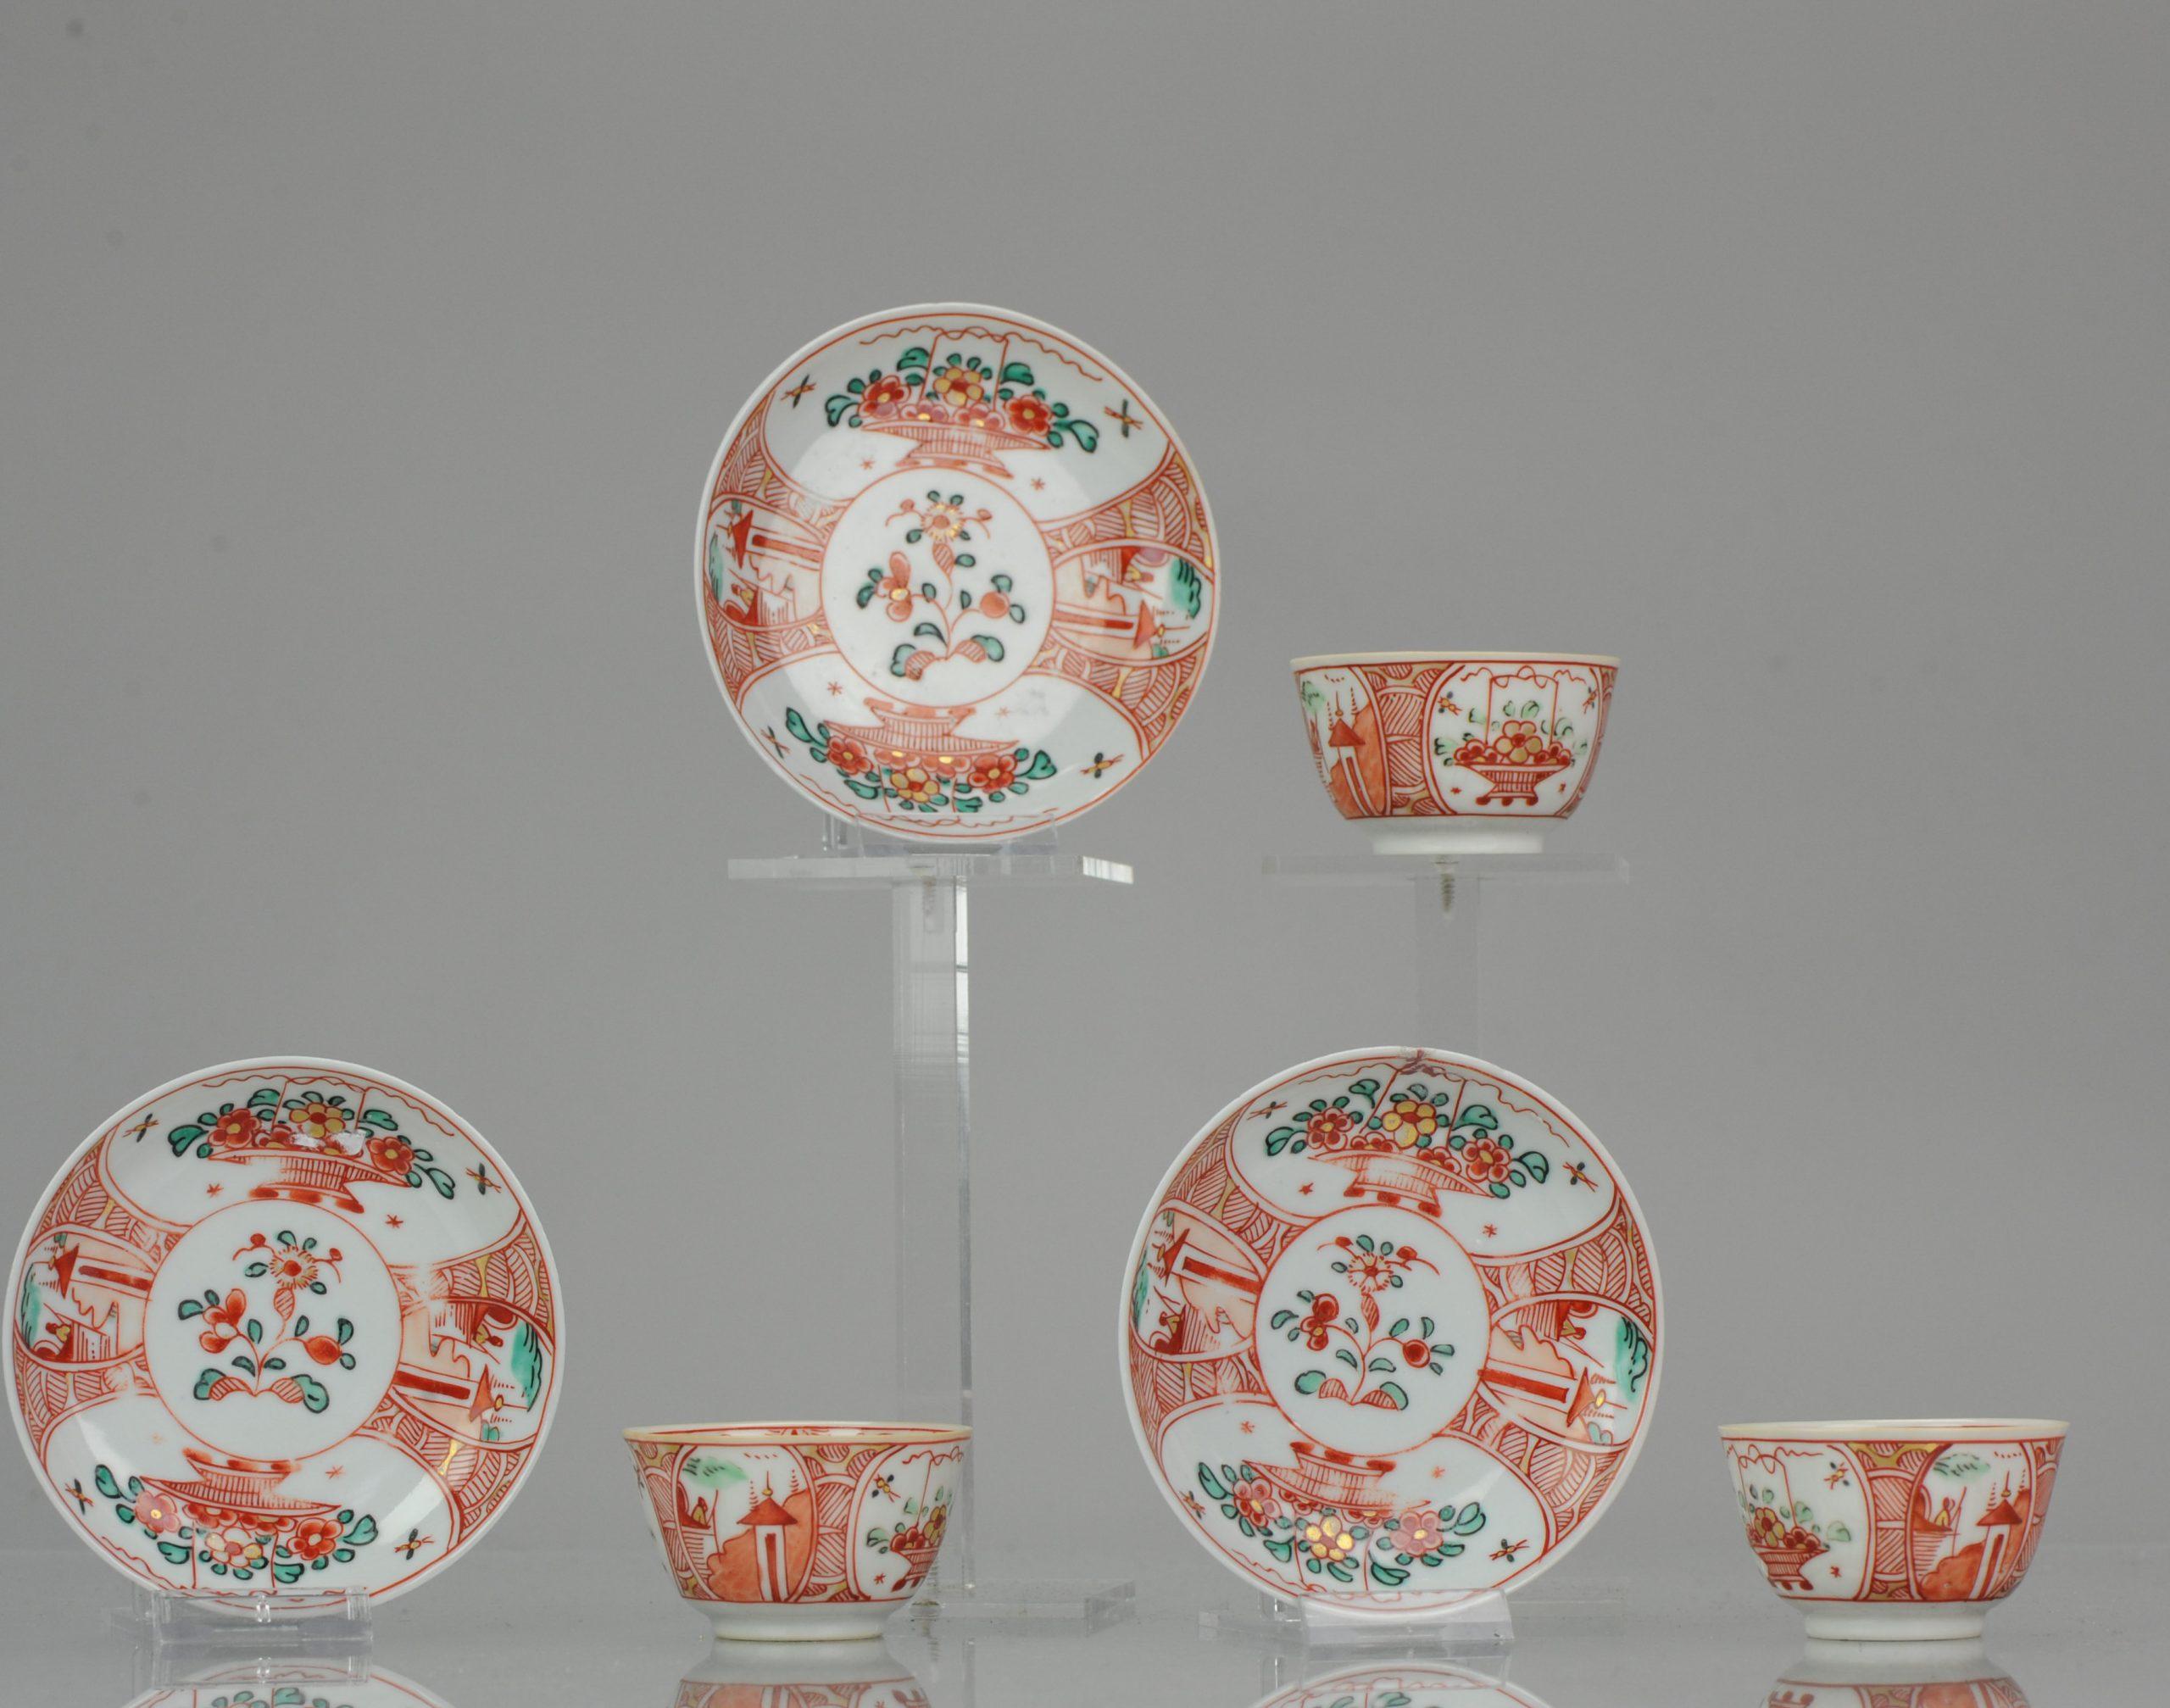 Description
A very nicely made set of 3 pieces of 18th century Qianlong Amsterdam Bont porcelain.

We take a look at Amsterdams Bont porcelain from China. A relatively unknown niche of Chinese porcelain from ca 1680-1740 that was partly decorated